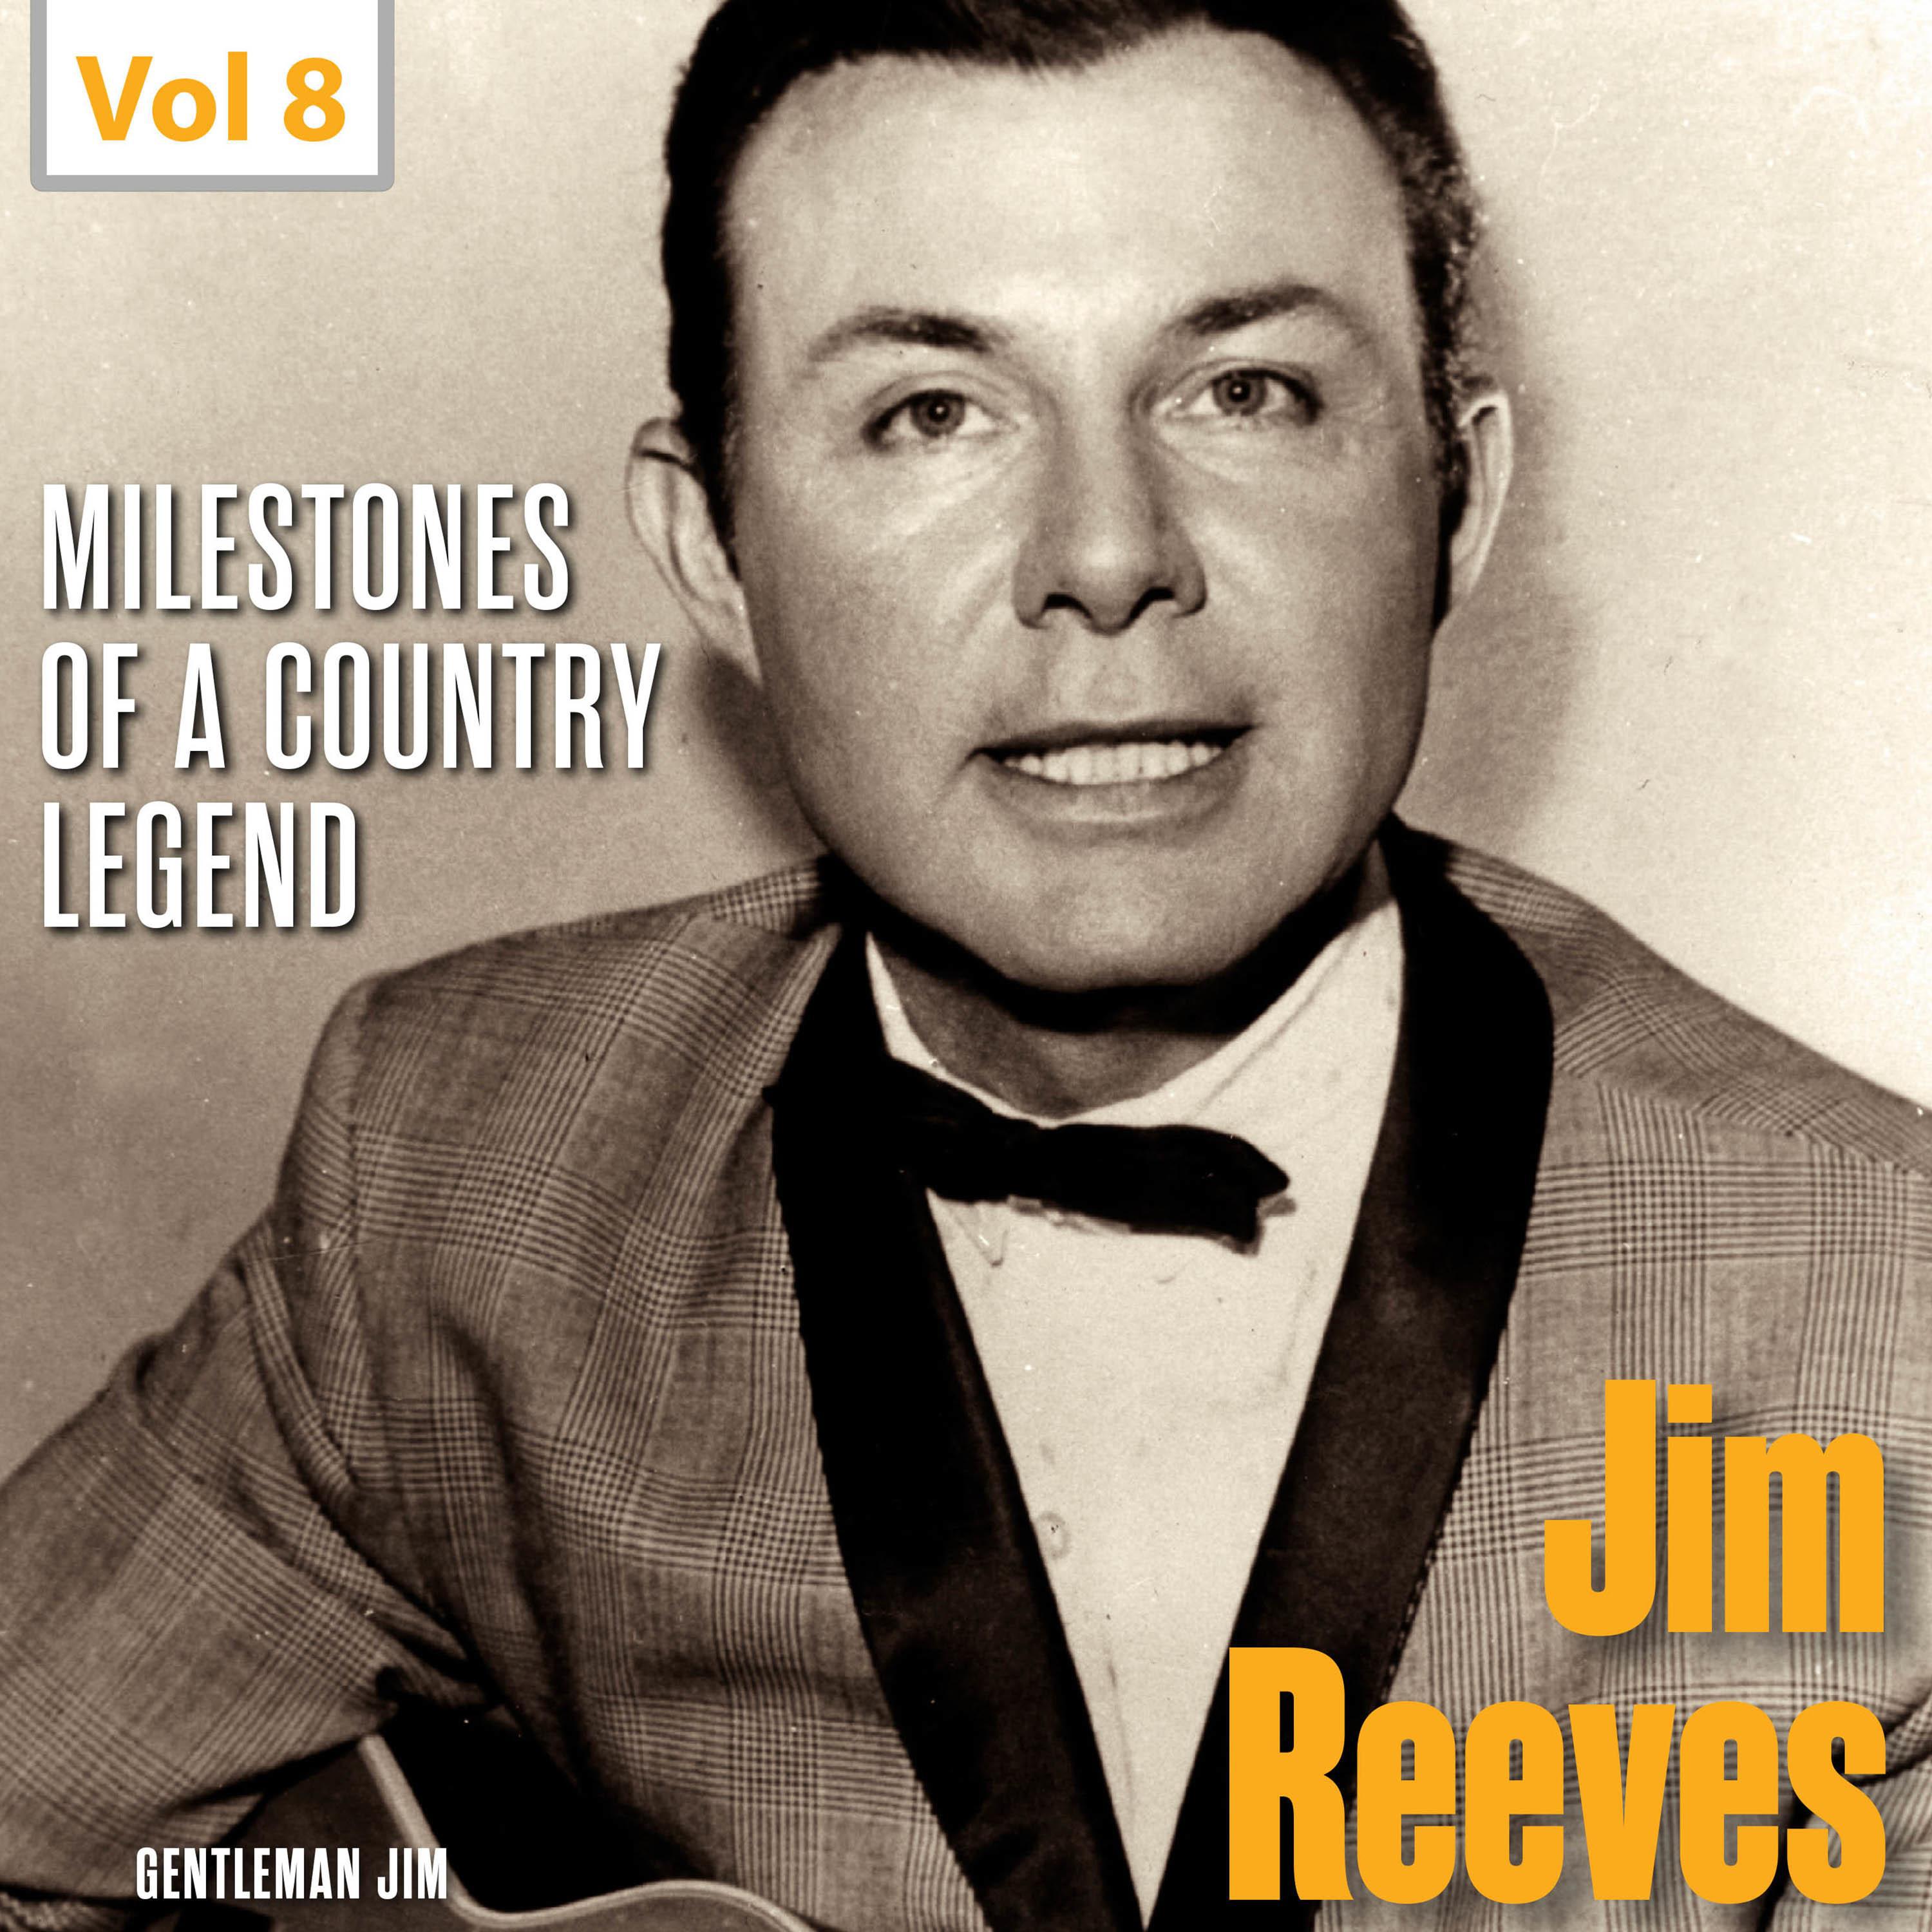 Milestones of a Country Legend - Jim Reeves, Vol. 8